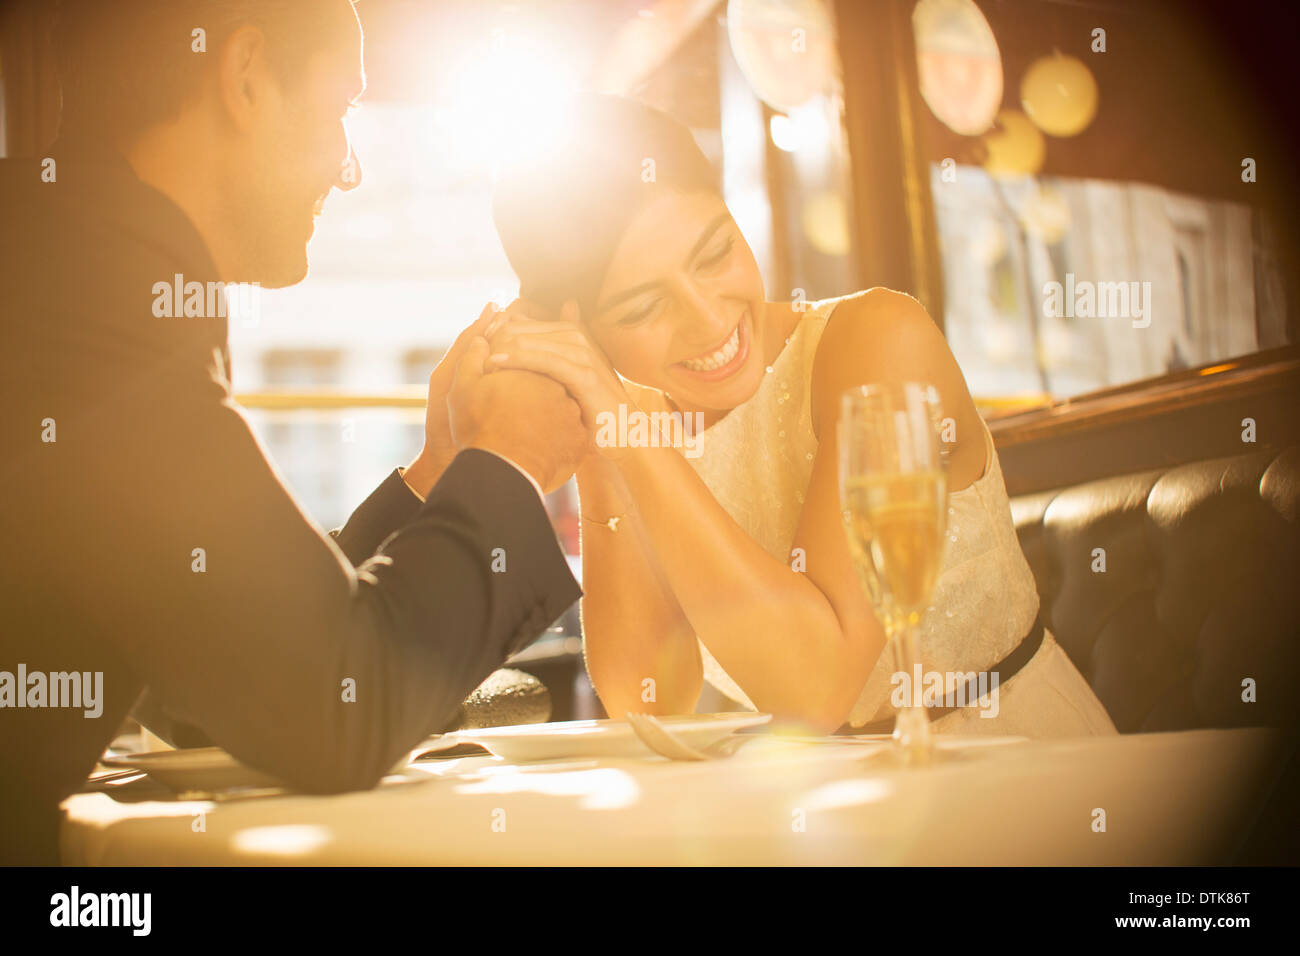 Couple holding hands in restaurant Stock Photo